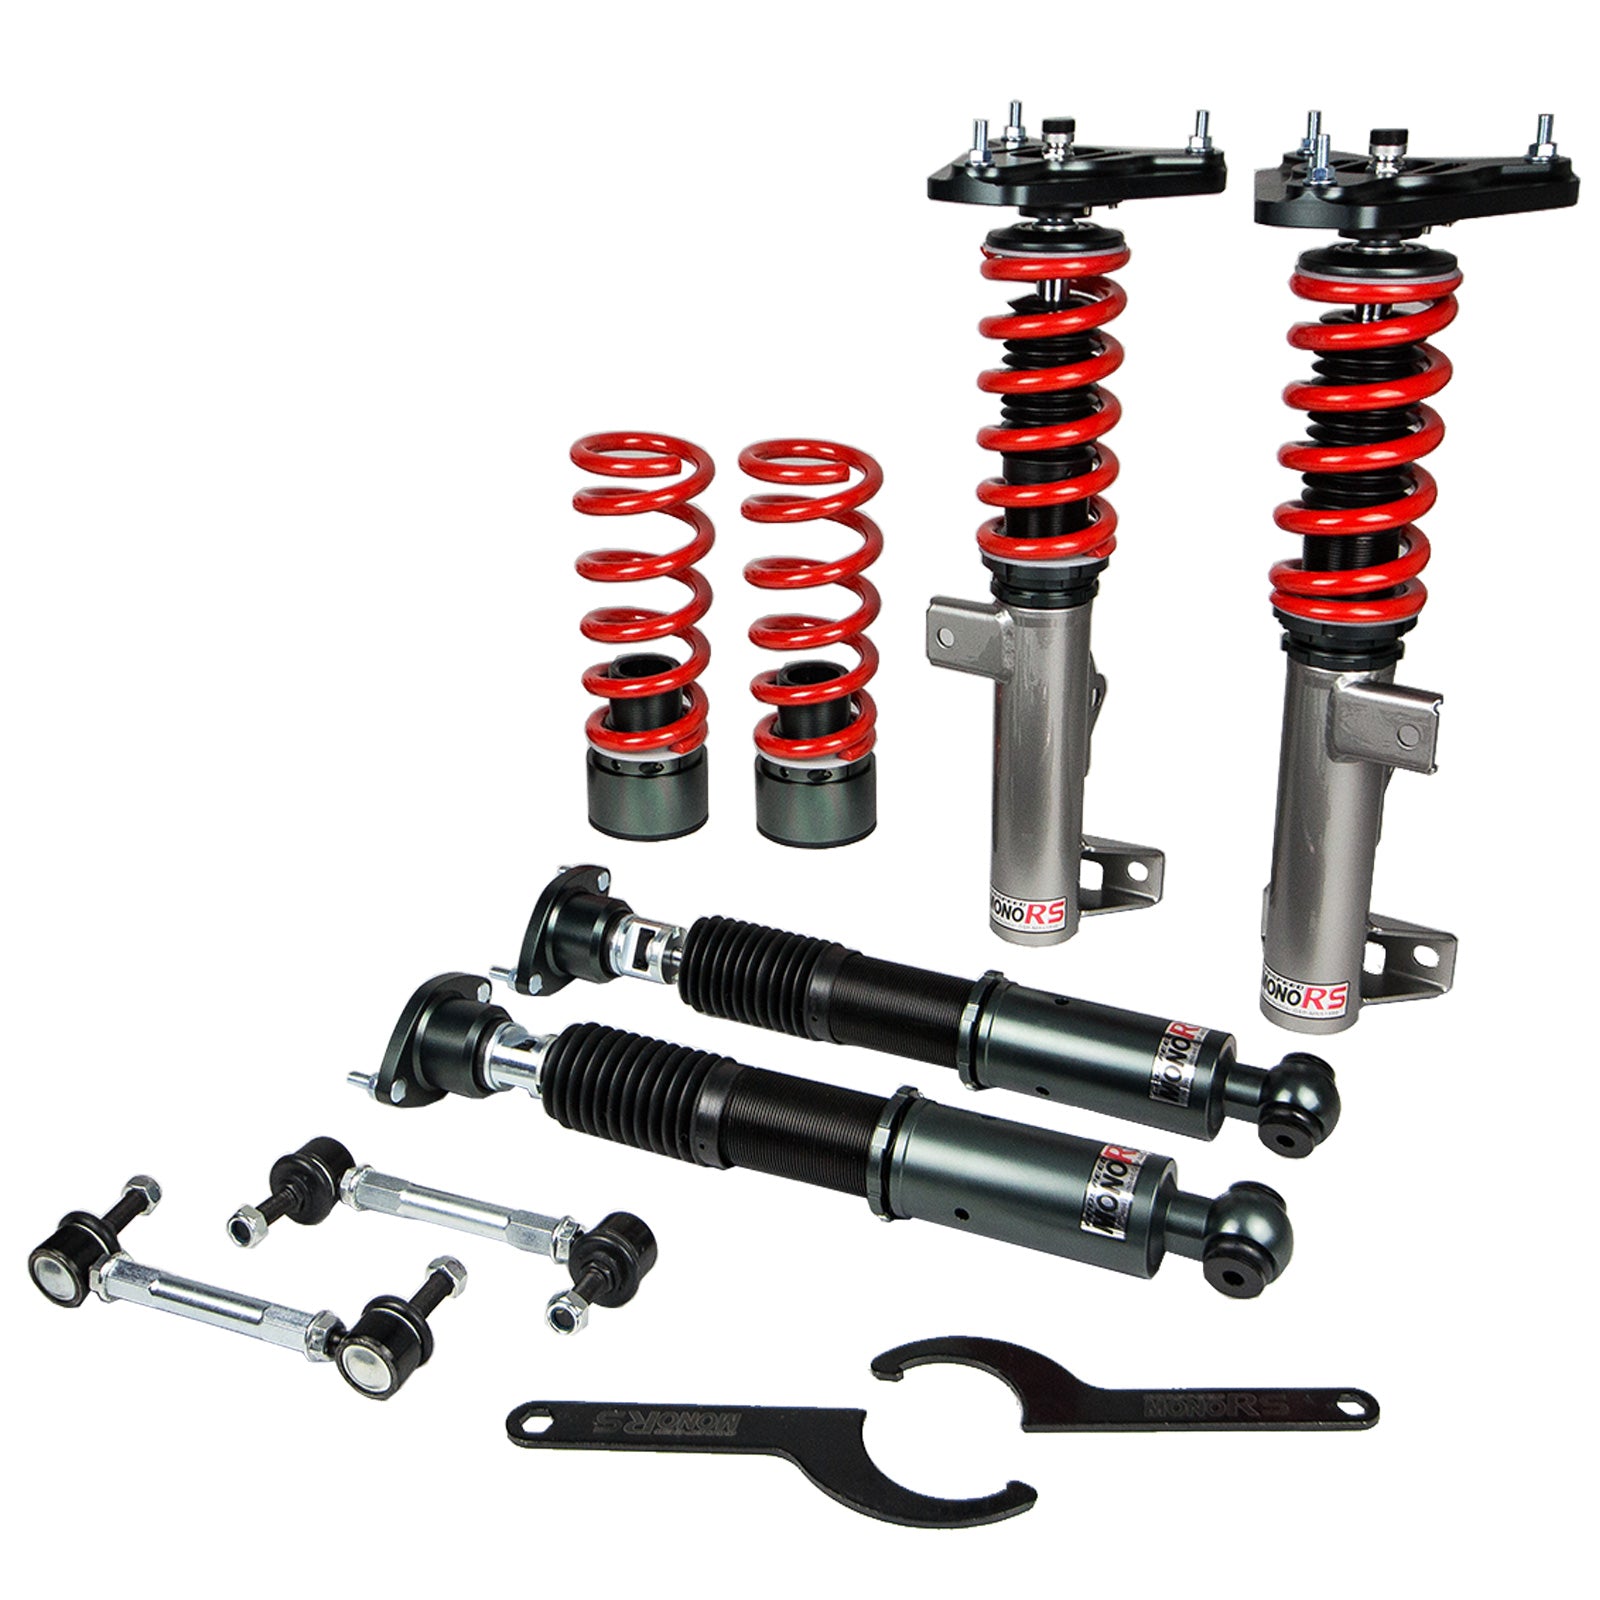 Godspeed MRS1890-B MonoRS Coilover Lowering Kit, 32 Damping Adjustment, Ride Height Adjustable